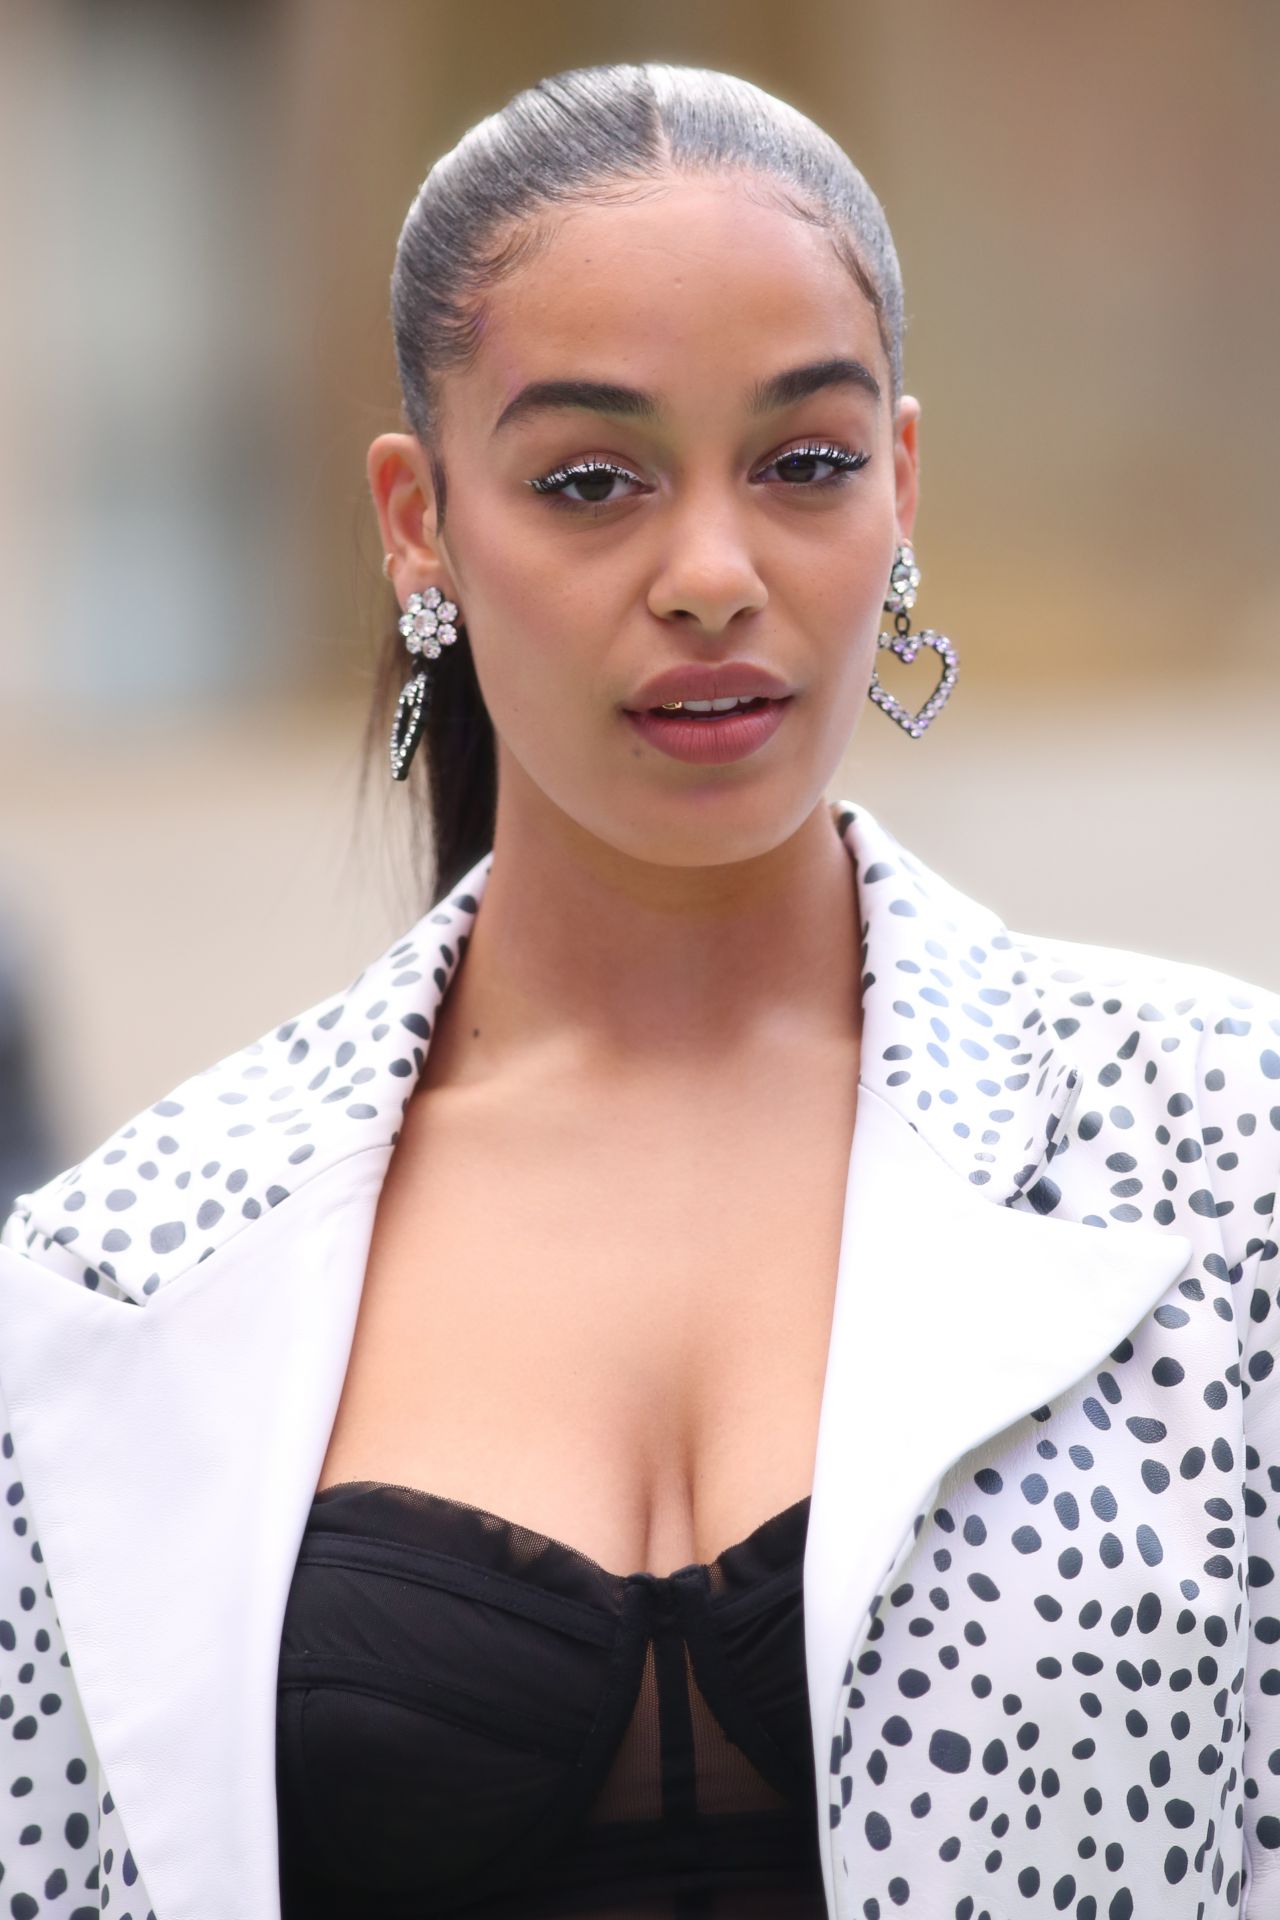 jorja-smith-royal-academy-of-arts-summer-exhibition-party-2019-in-london-11.jpg